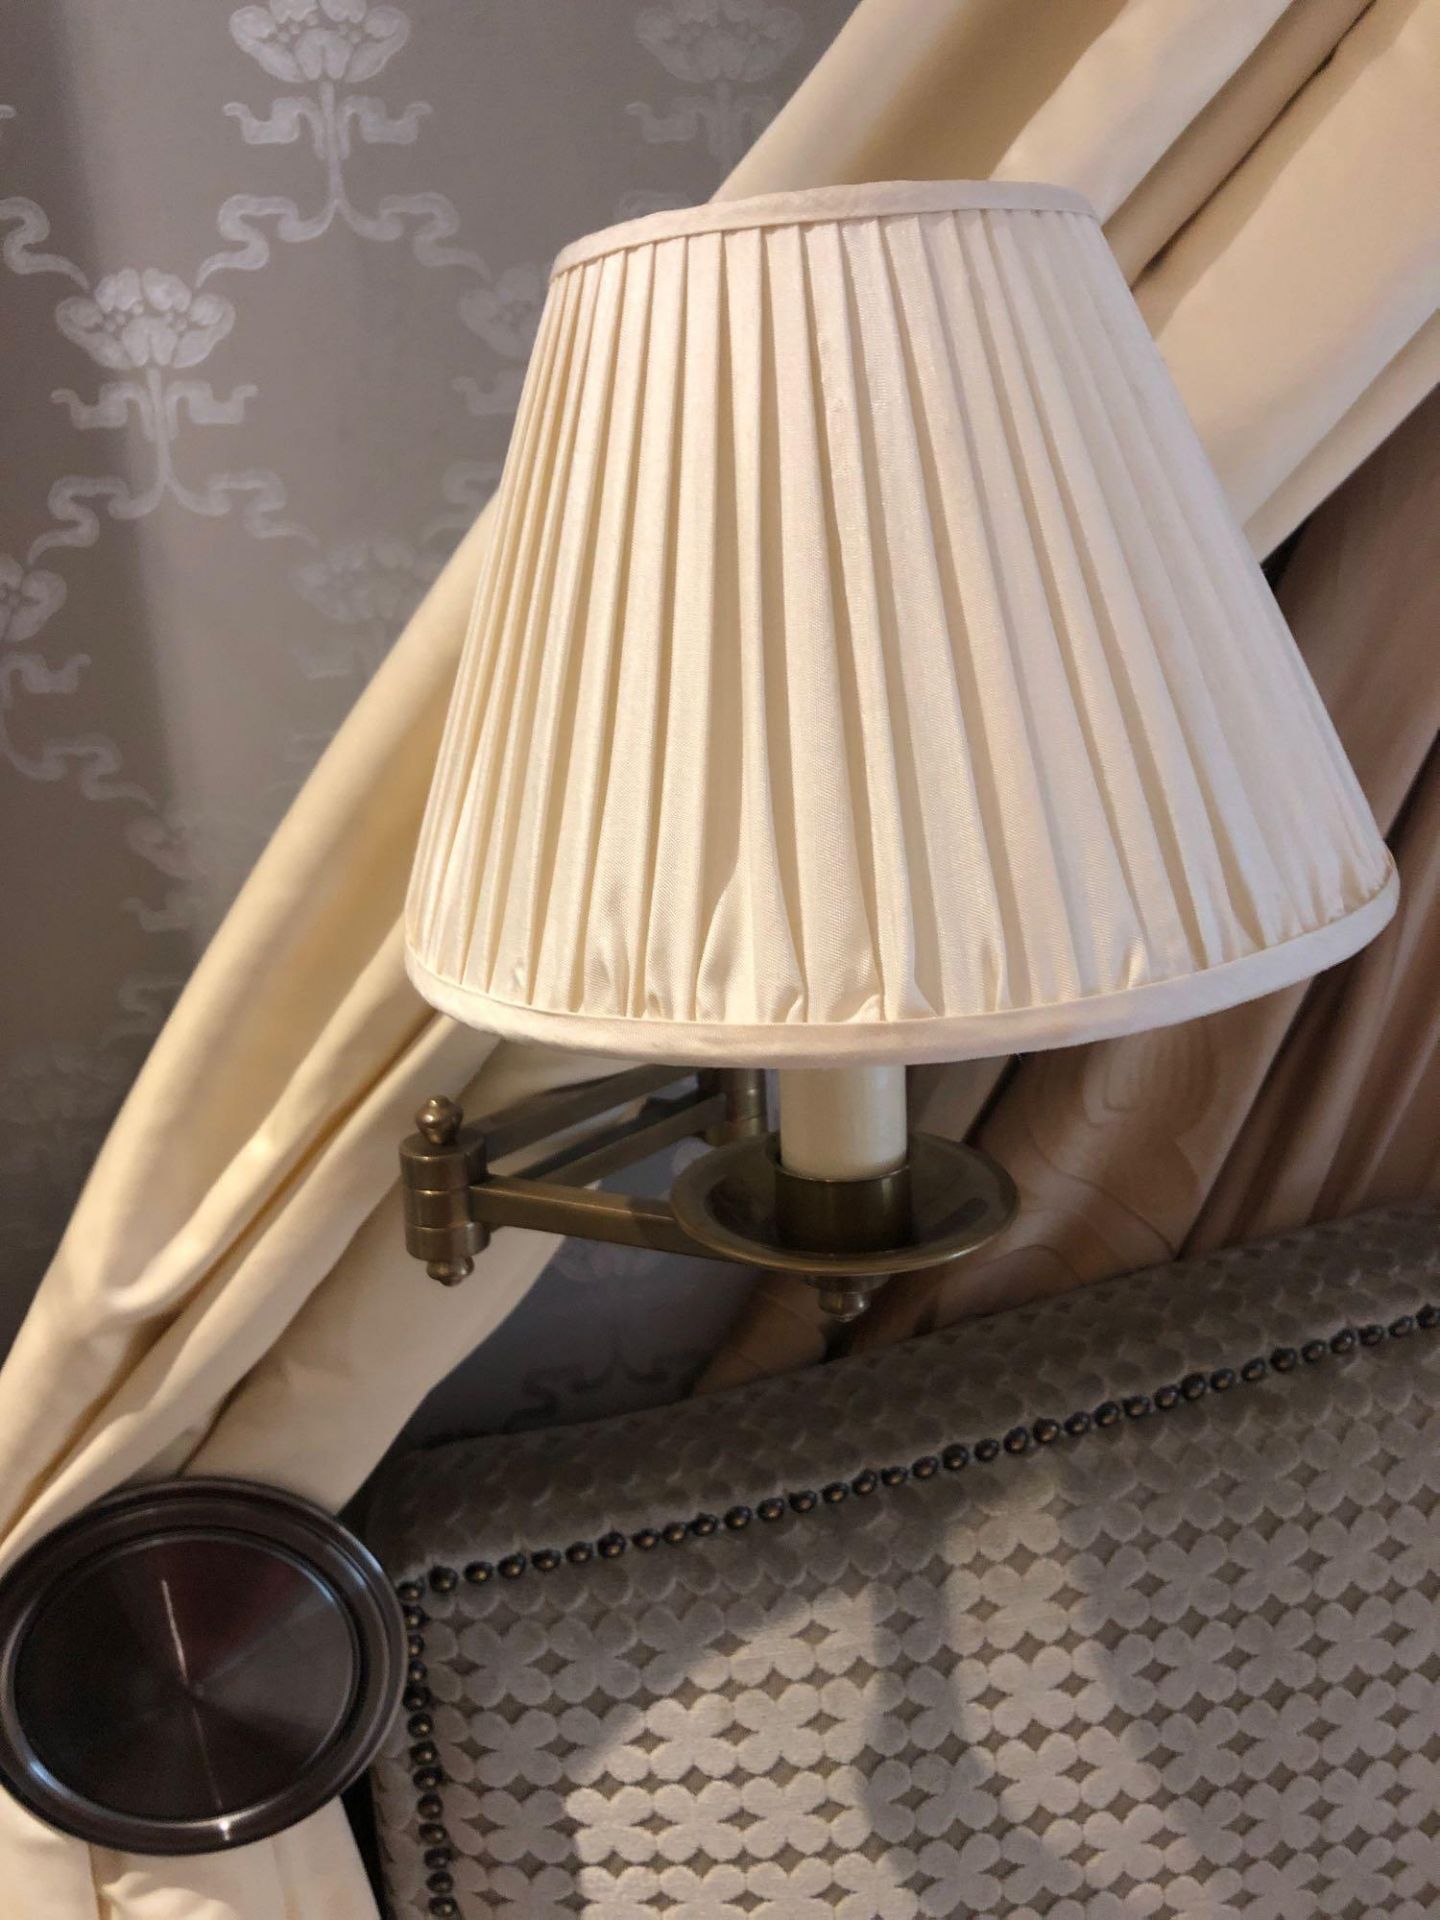 A Pair Of Gentlemen Library Swing Arm Single Candle Wall Sconce With Pleated Shade (Room 510) - Image 2 of 2